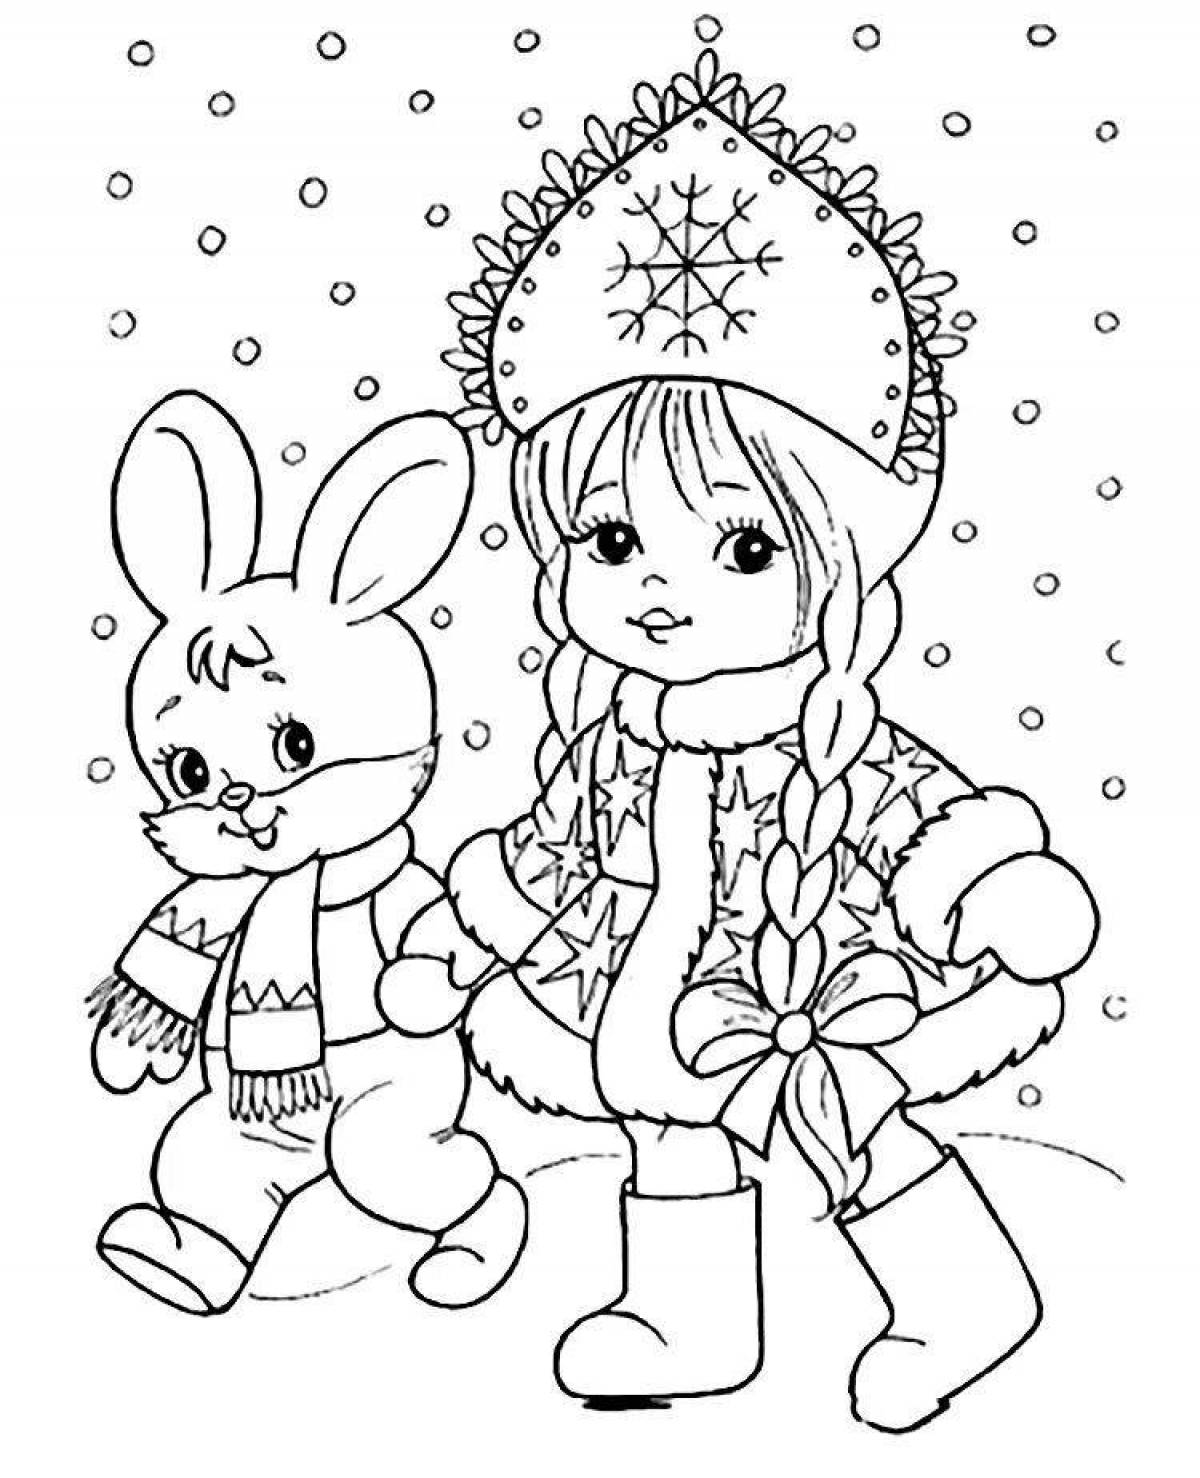 Delightful Christmas coloring book